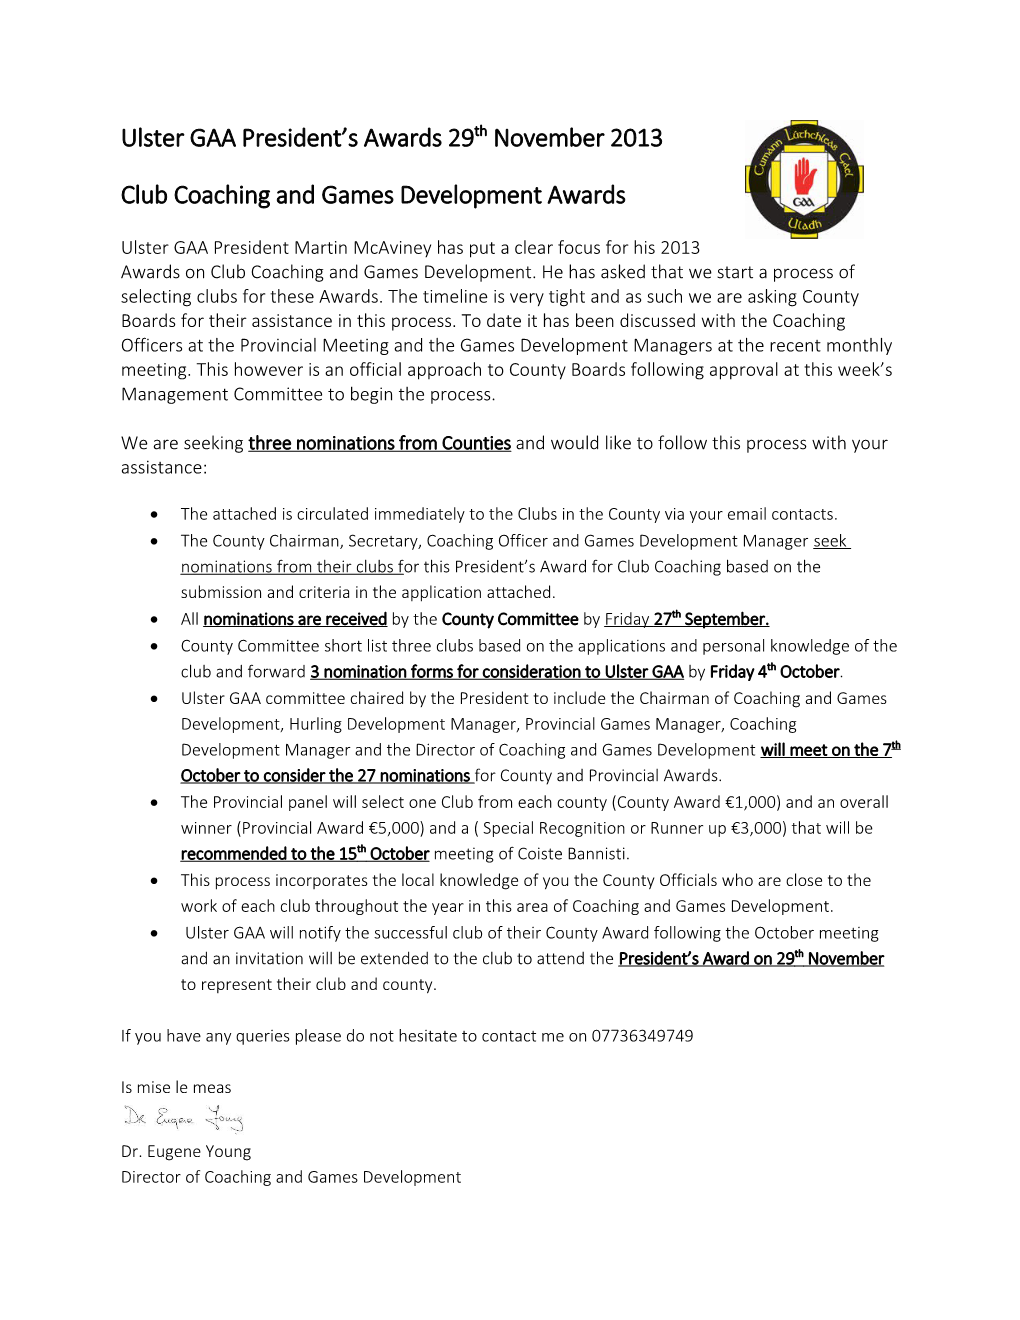 Club Coaching and Games Development Awards